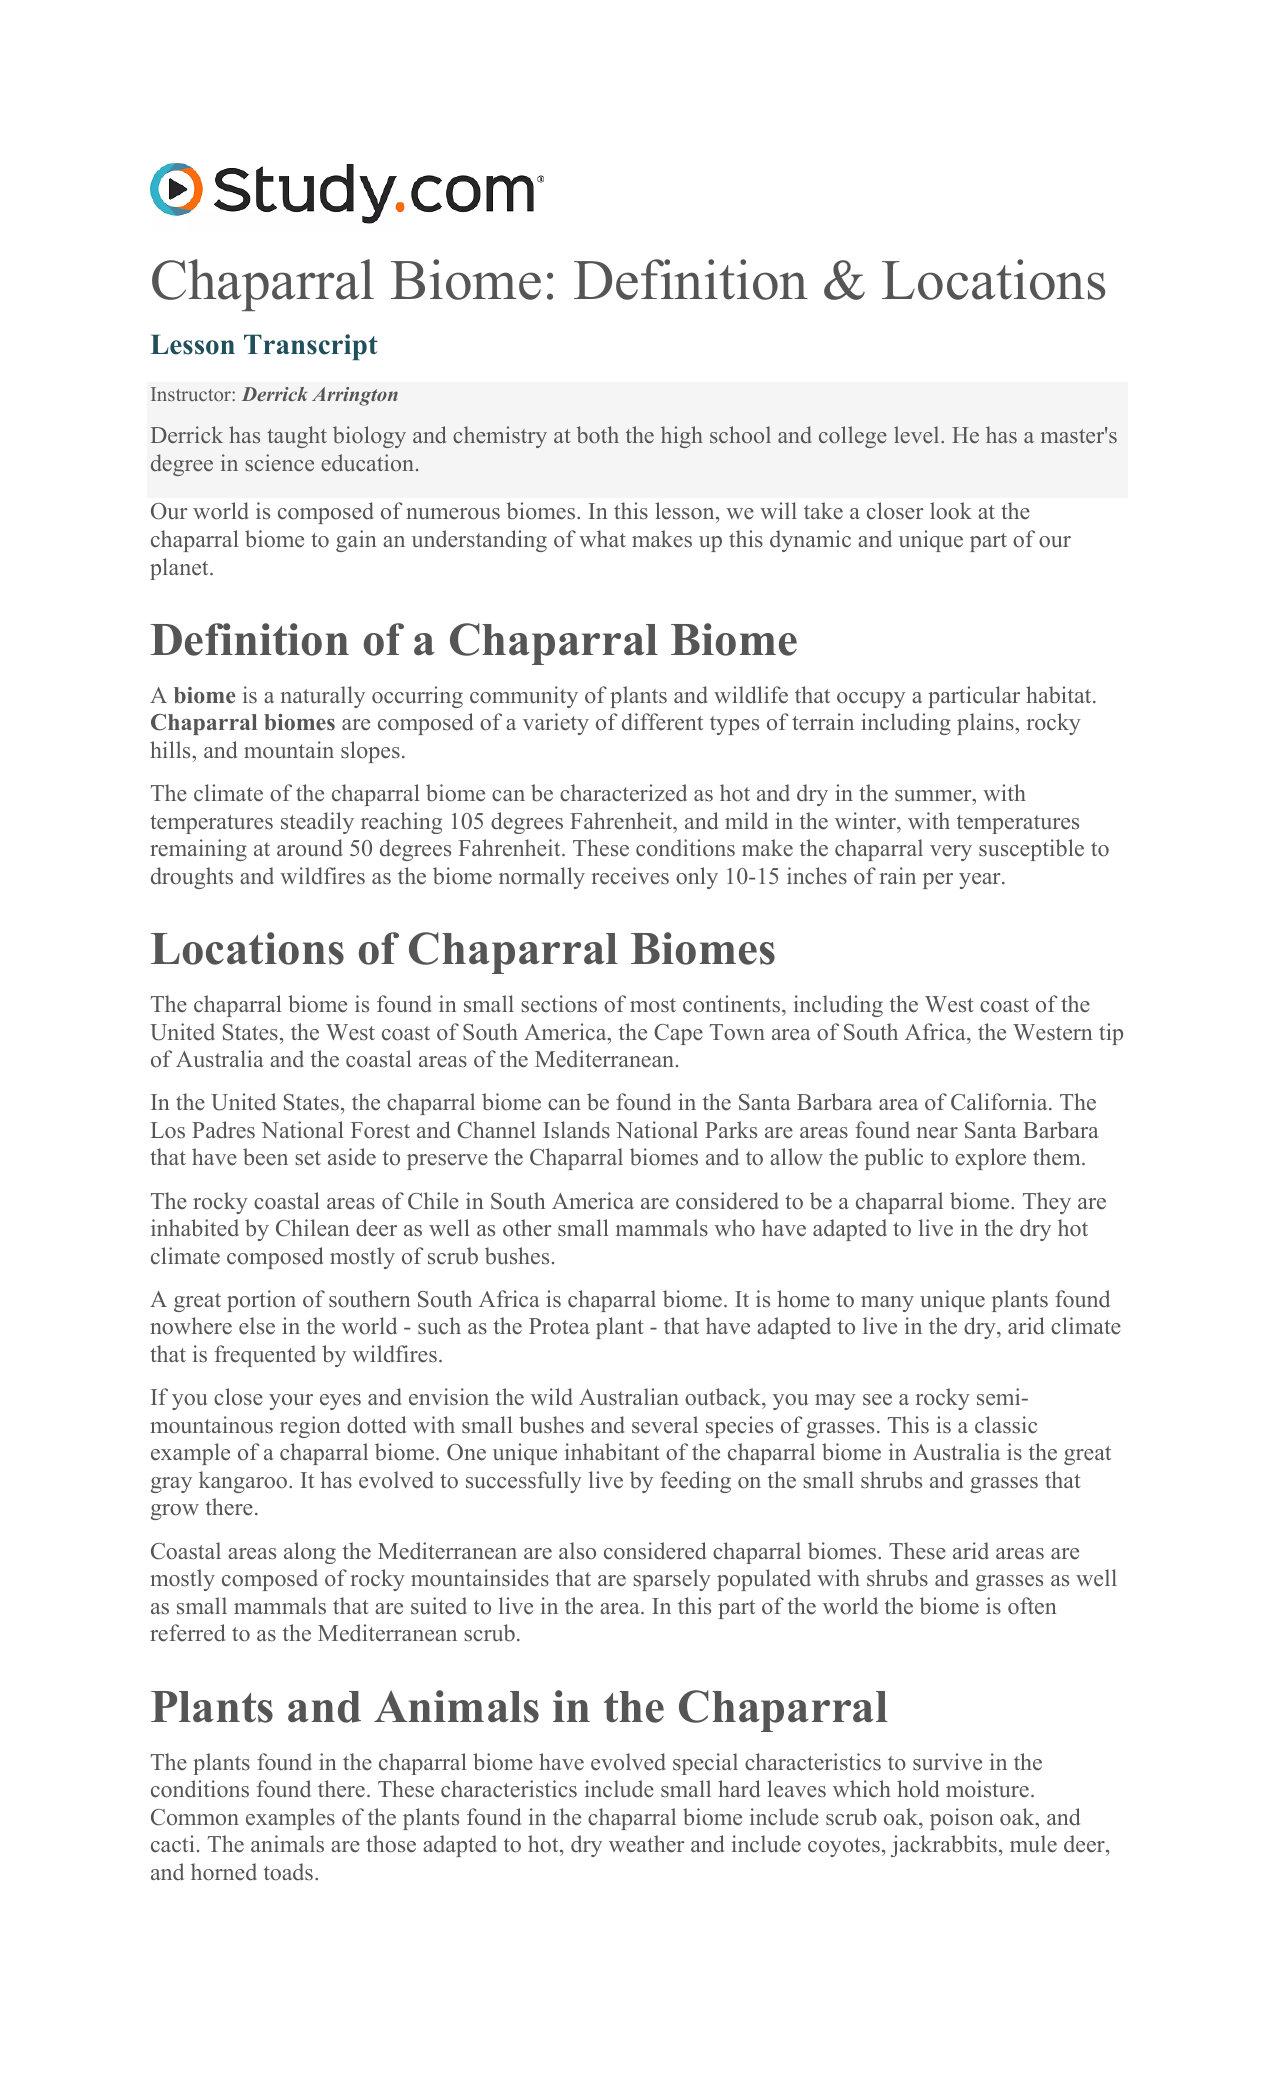 Chaparral Biome - Definition & Locations